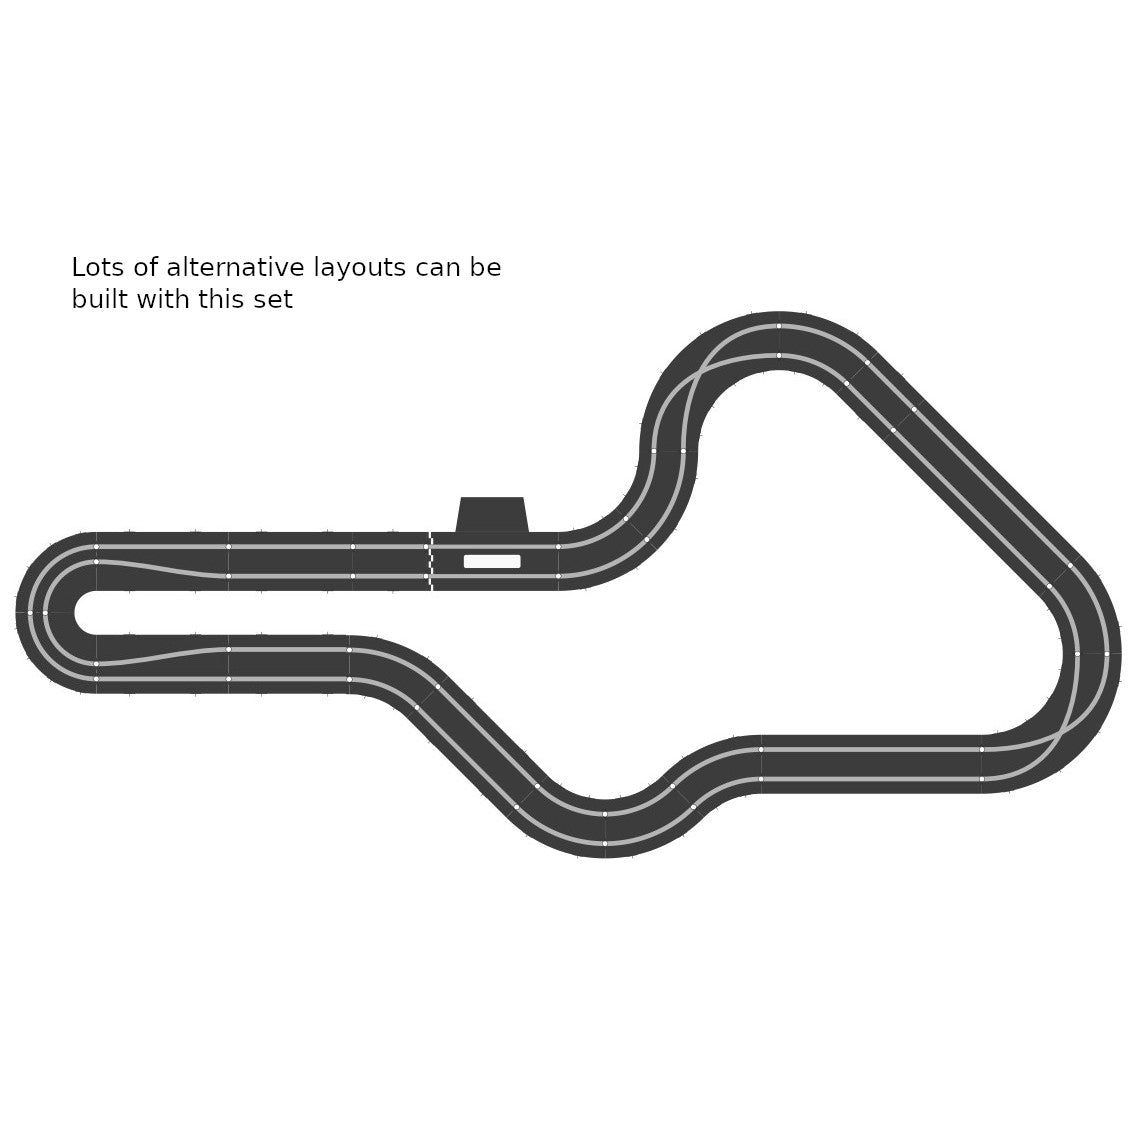 Scalextric Sport 1:32 ARC Air Set Layout With McLaren Cars #AS4